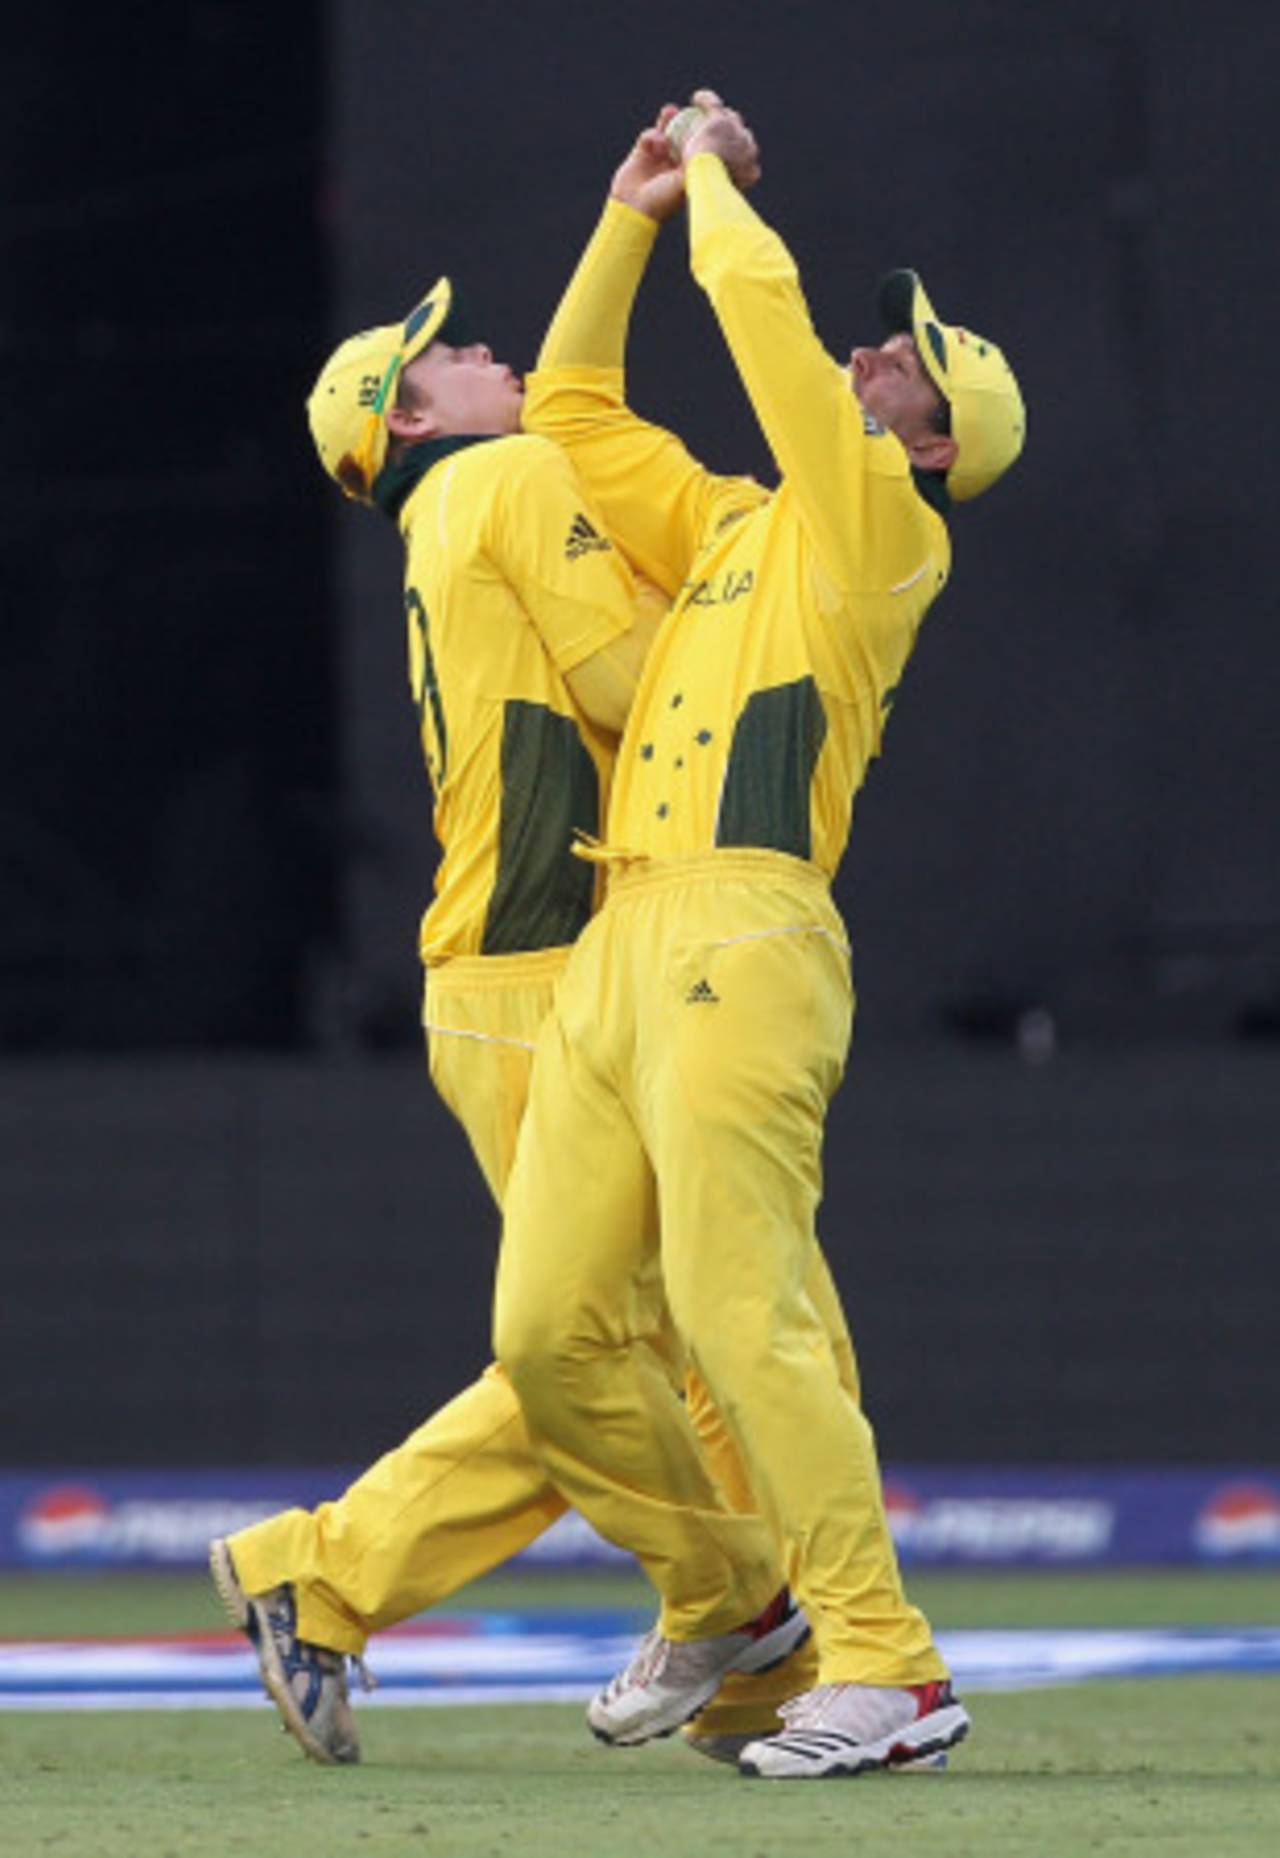 Ricky Ponting collides with Steven Smith while taking a catch to dismiss Harvir Baidwan, Australia v Canada, Group A, World Cup, Bangalore, March 16, 2011